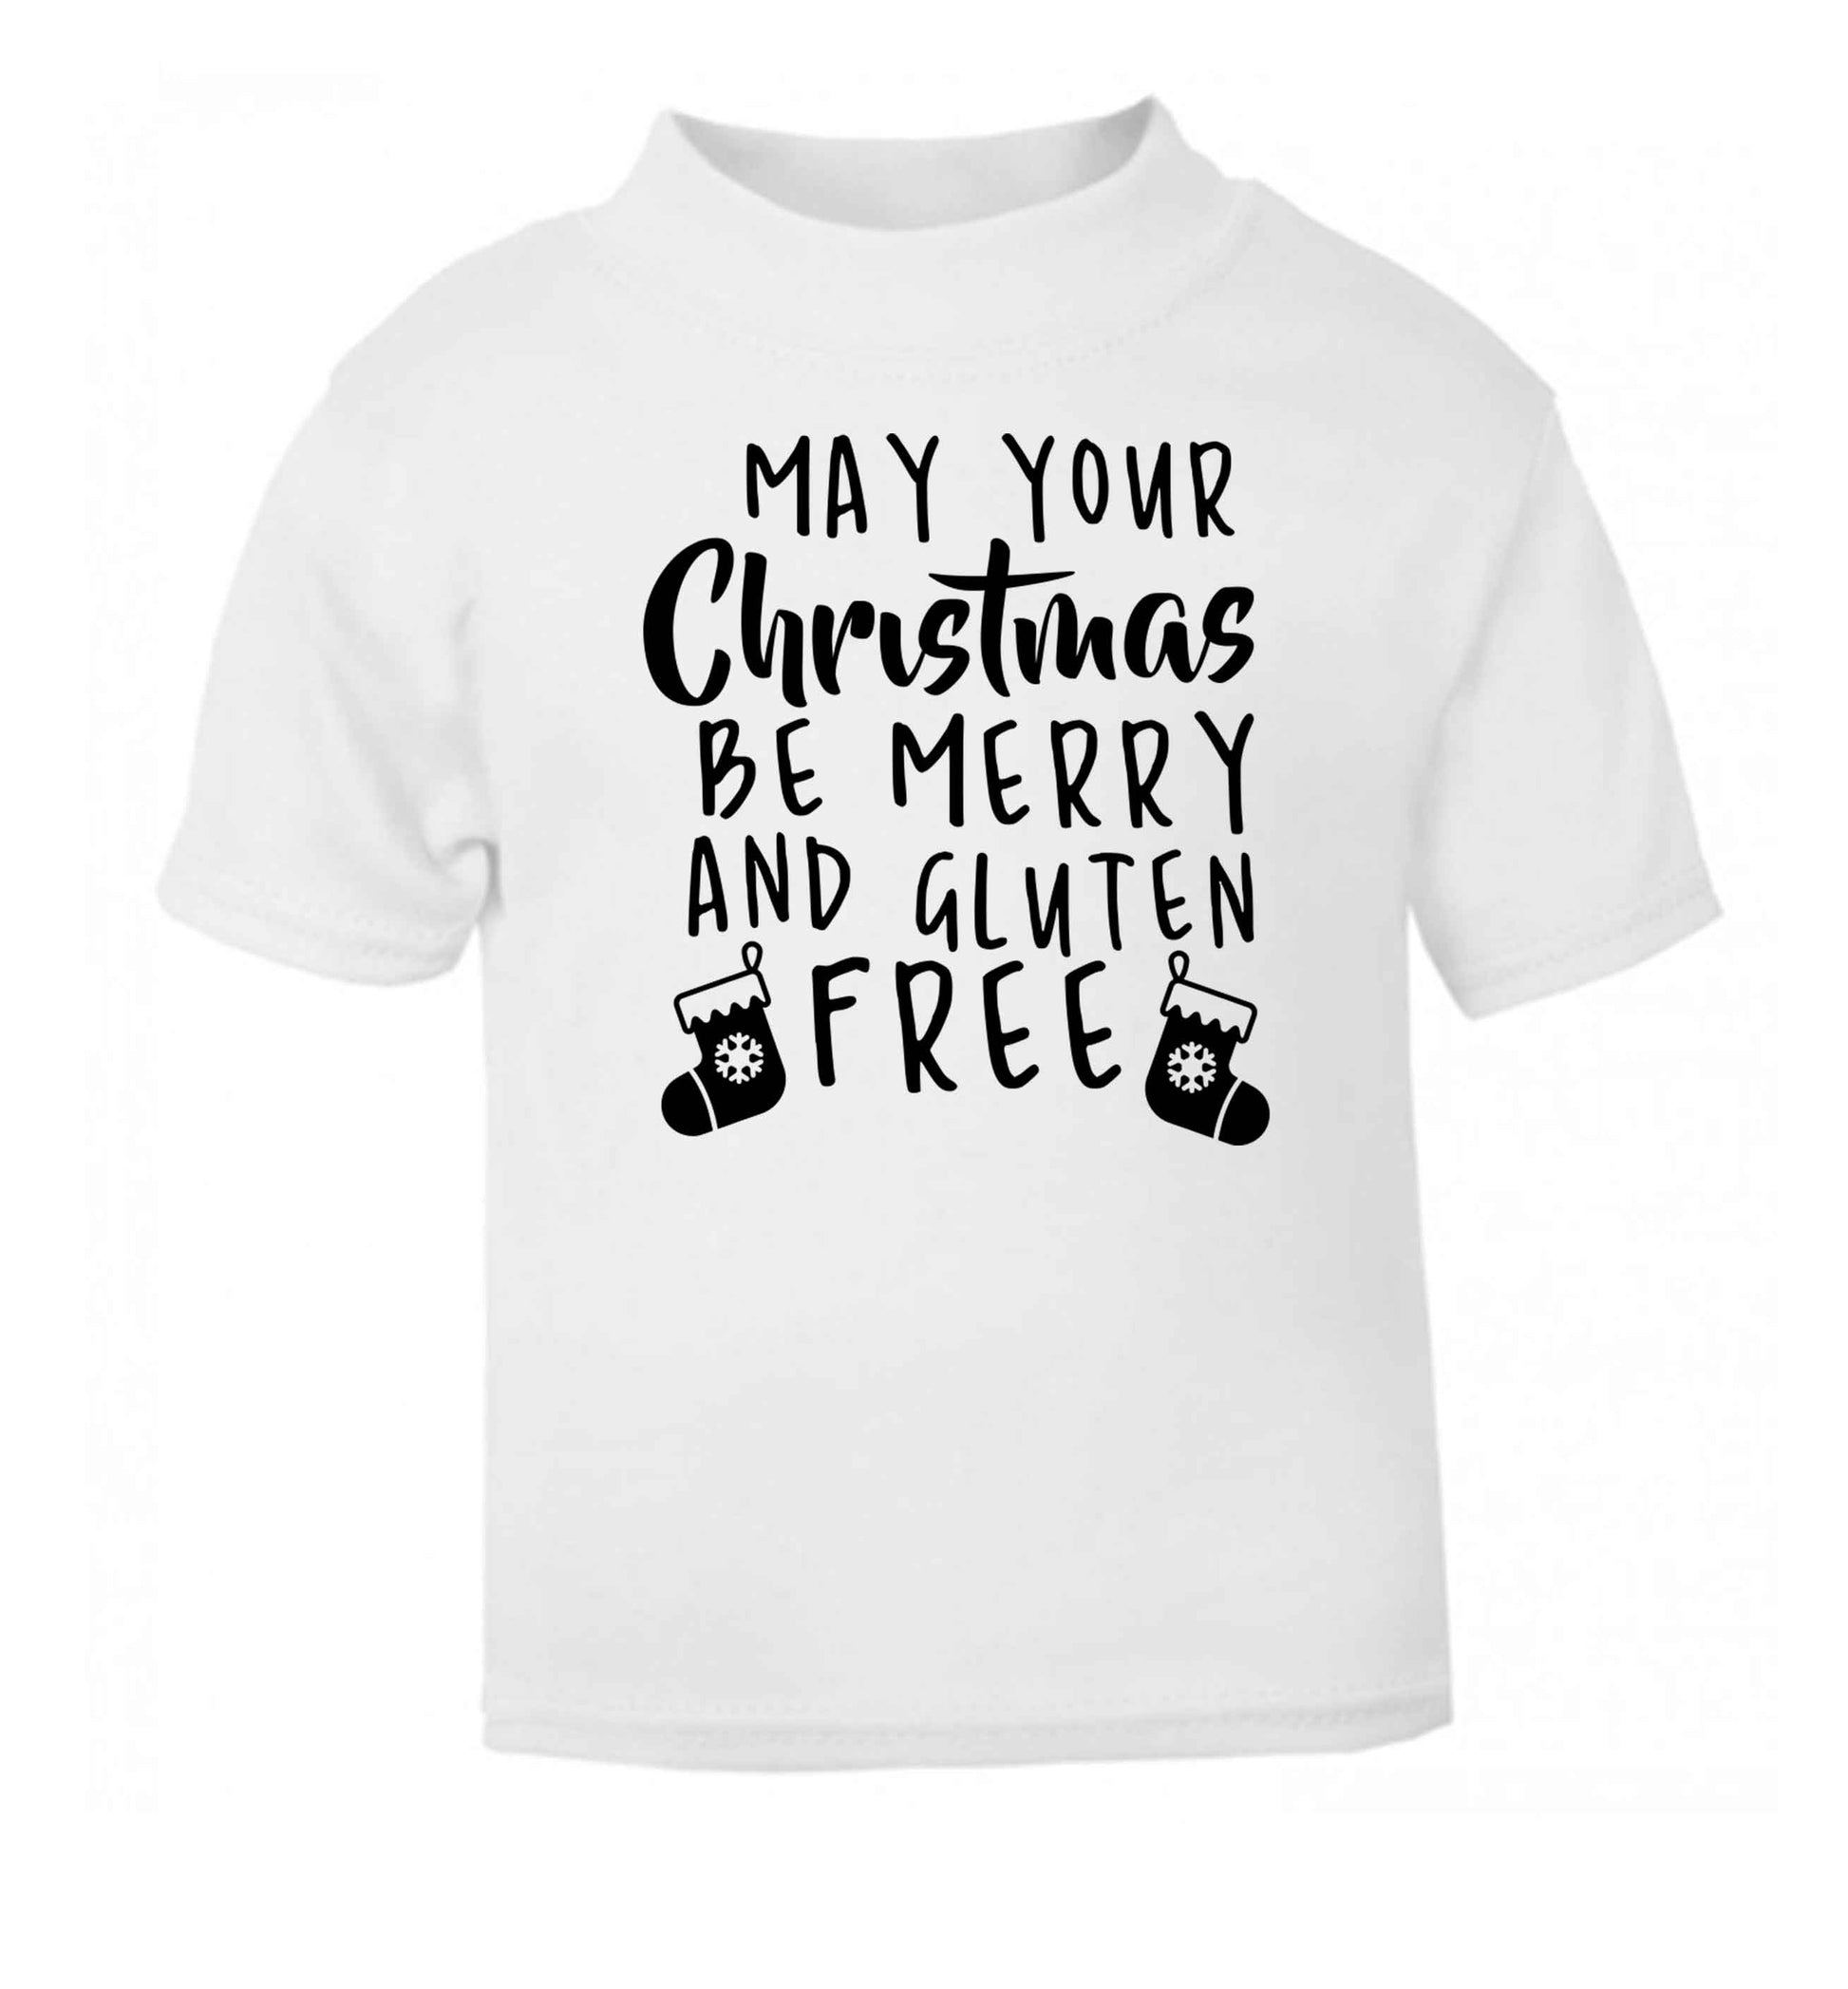 May your Christmas be merry and gluten free white Baby Toddler Tshirt 2 Years